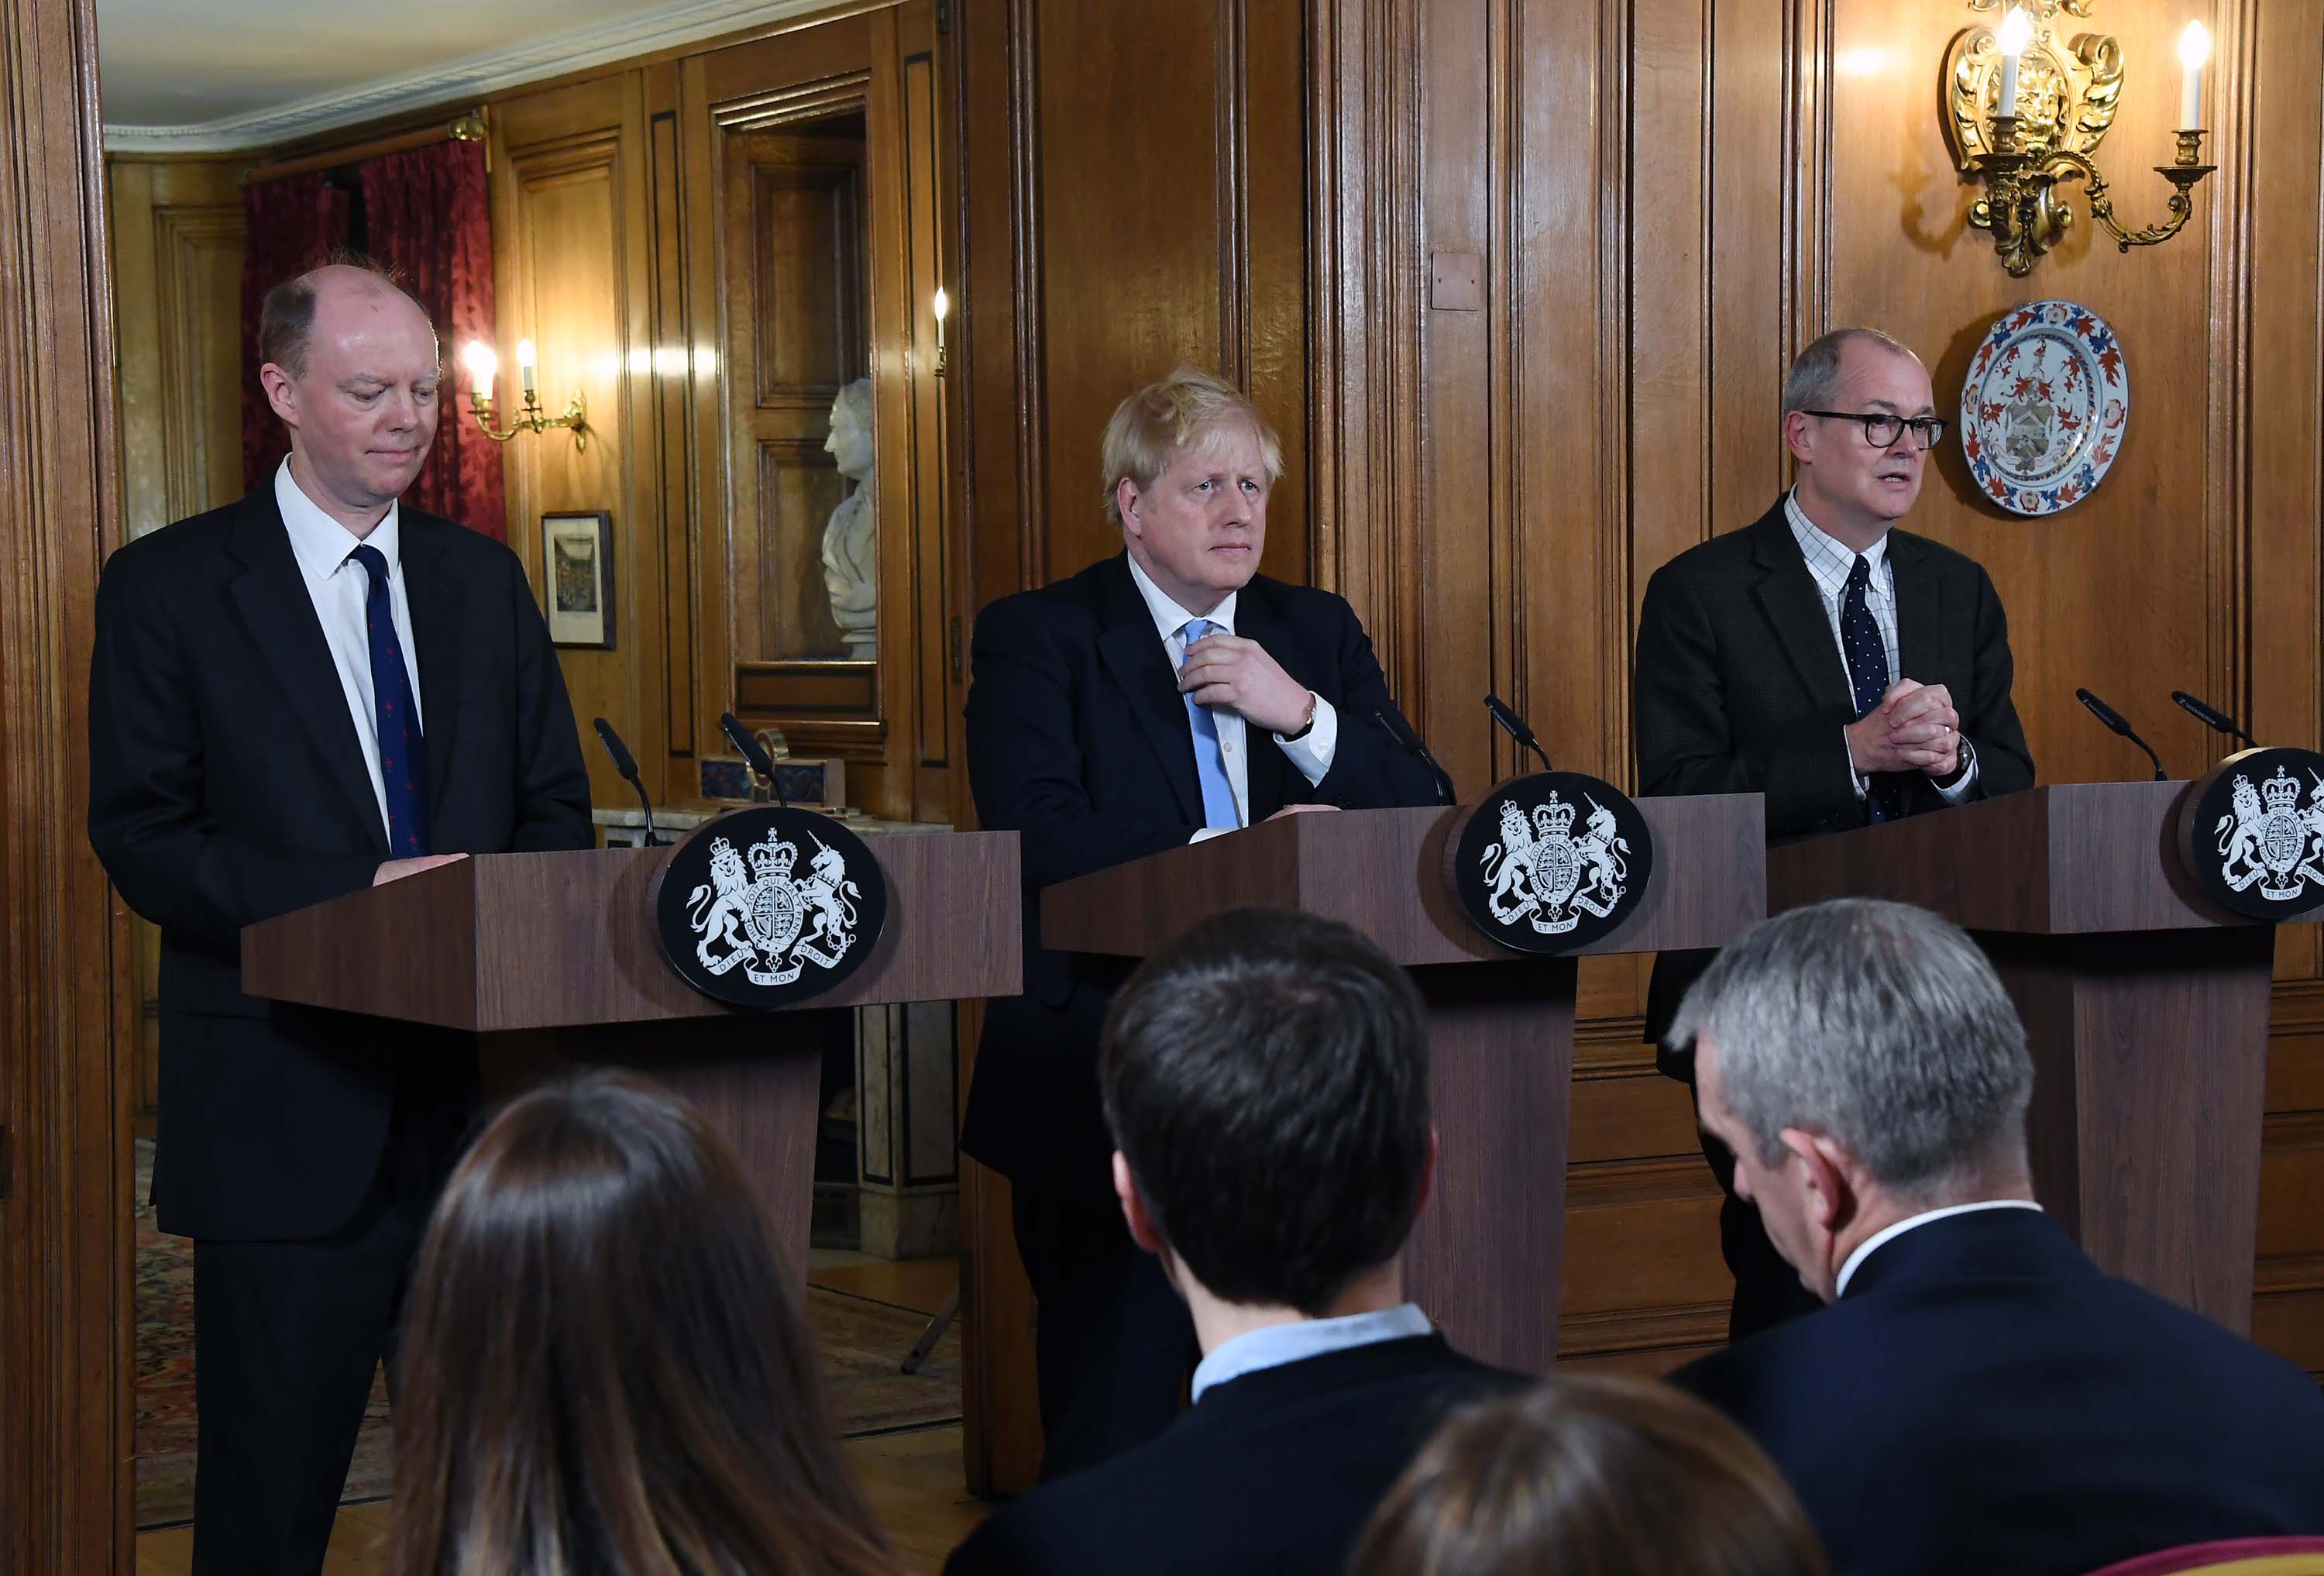 From left: Chief Medical Officer for England Chris Whitty, UK Prime Minister Boris Johnson, and Chief Scientific Adviser Patrick Vallance speak during a press conference in London, England, on March 9.